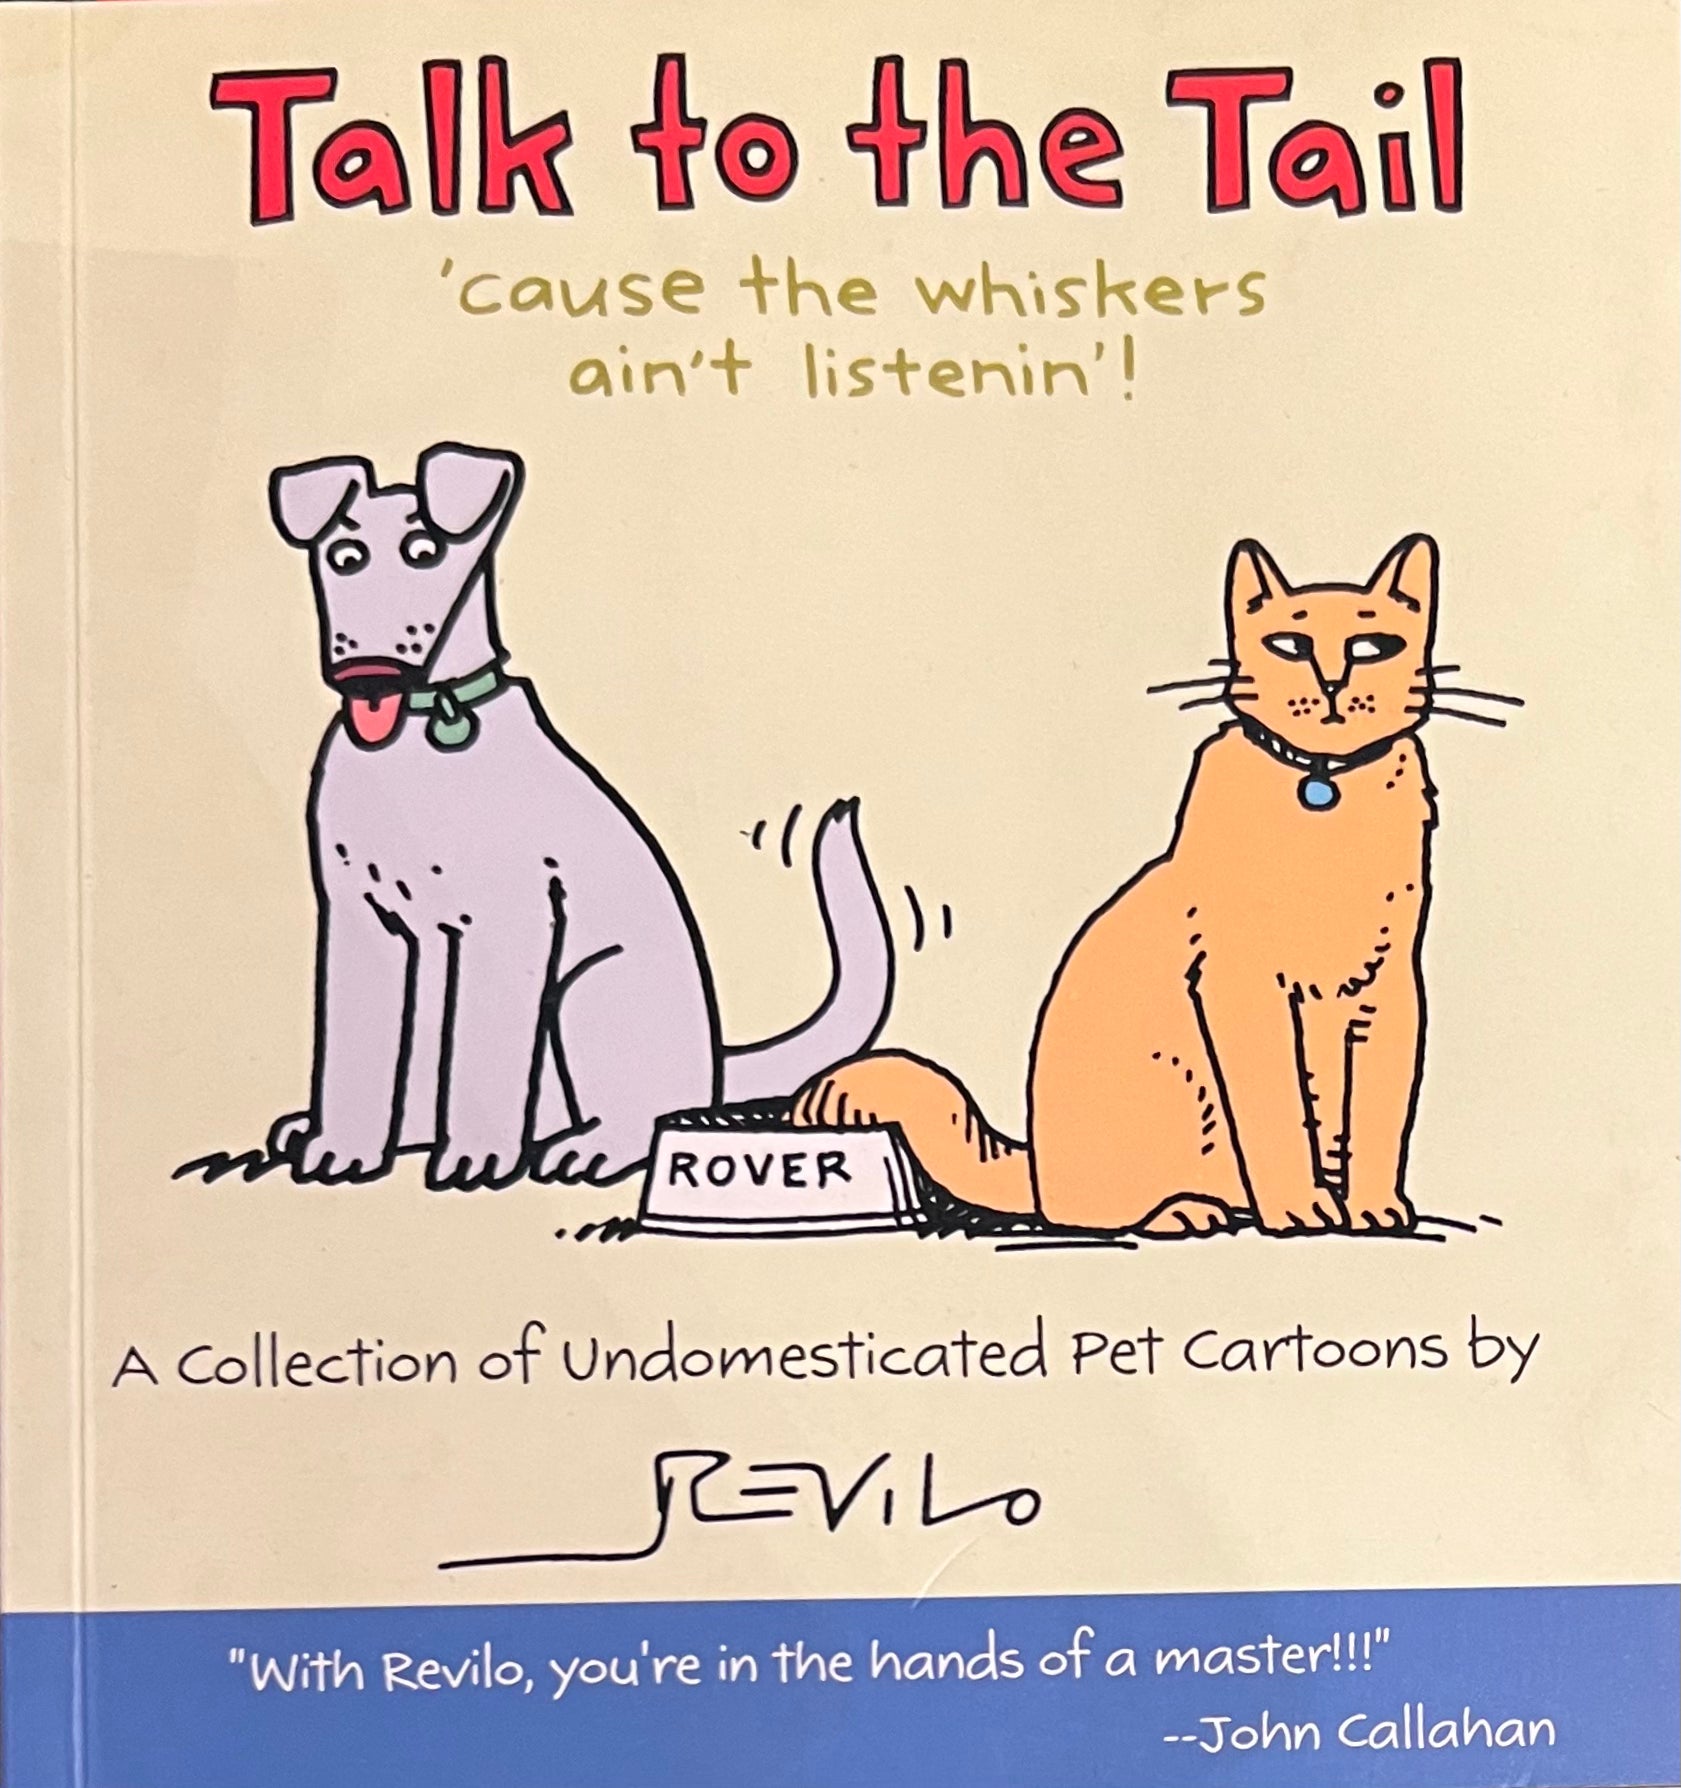 Talk to the Tail ‘Cause the Whiskers Ain’t Listenin’!: A Collection of Undomesticated Pet Cartoons, Revilo